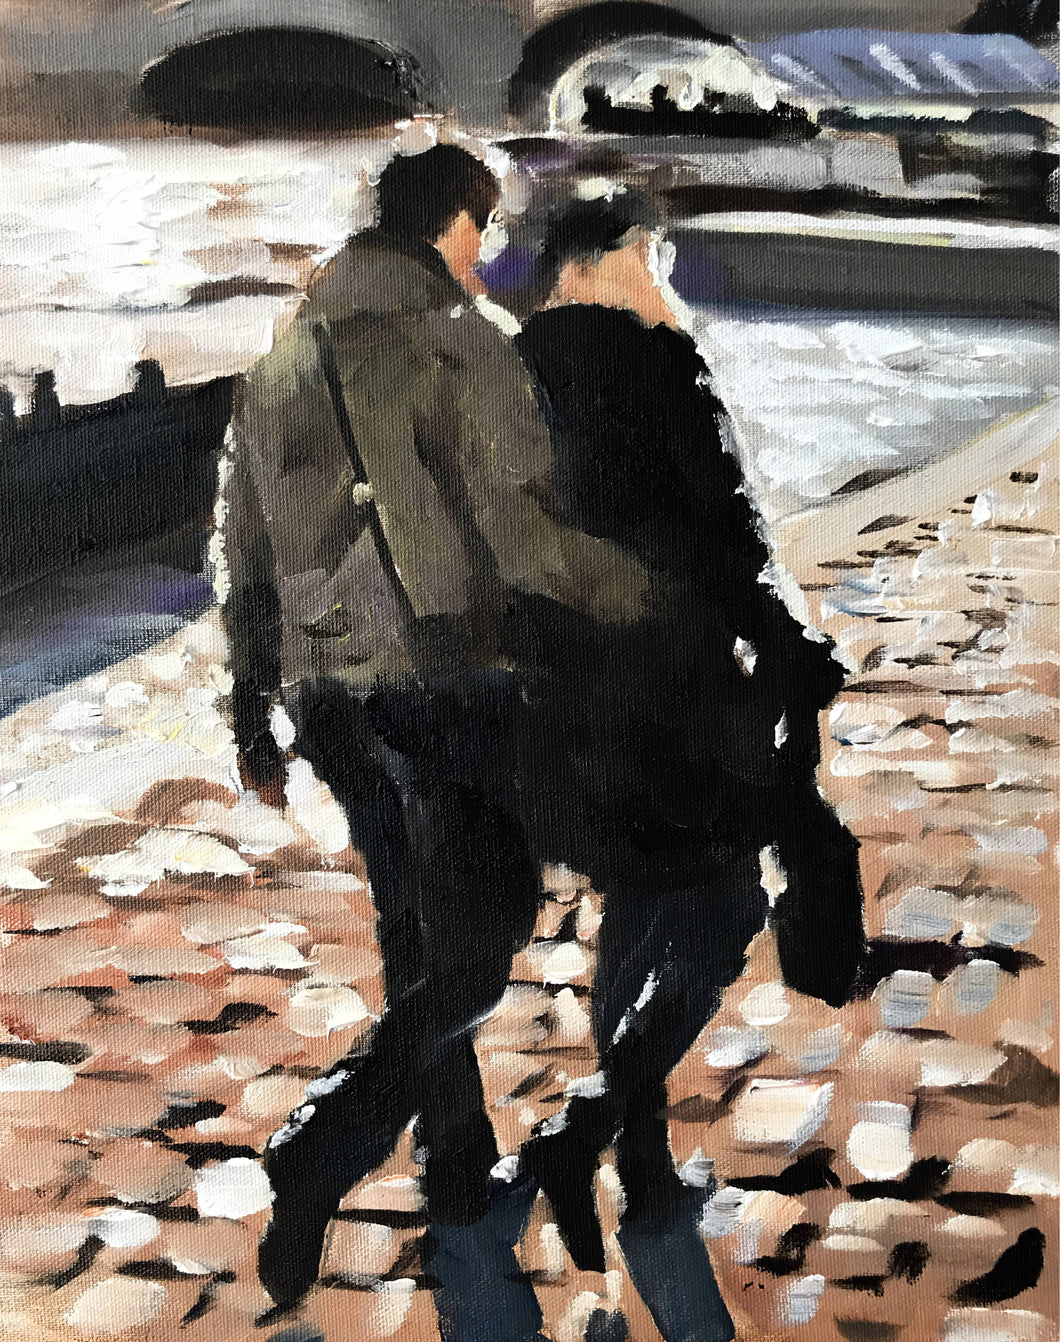 Couple walking by the river Painting, Poster, Prints, Originals, commissions,Fine Art - from original oil painting by James Coates